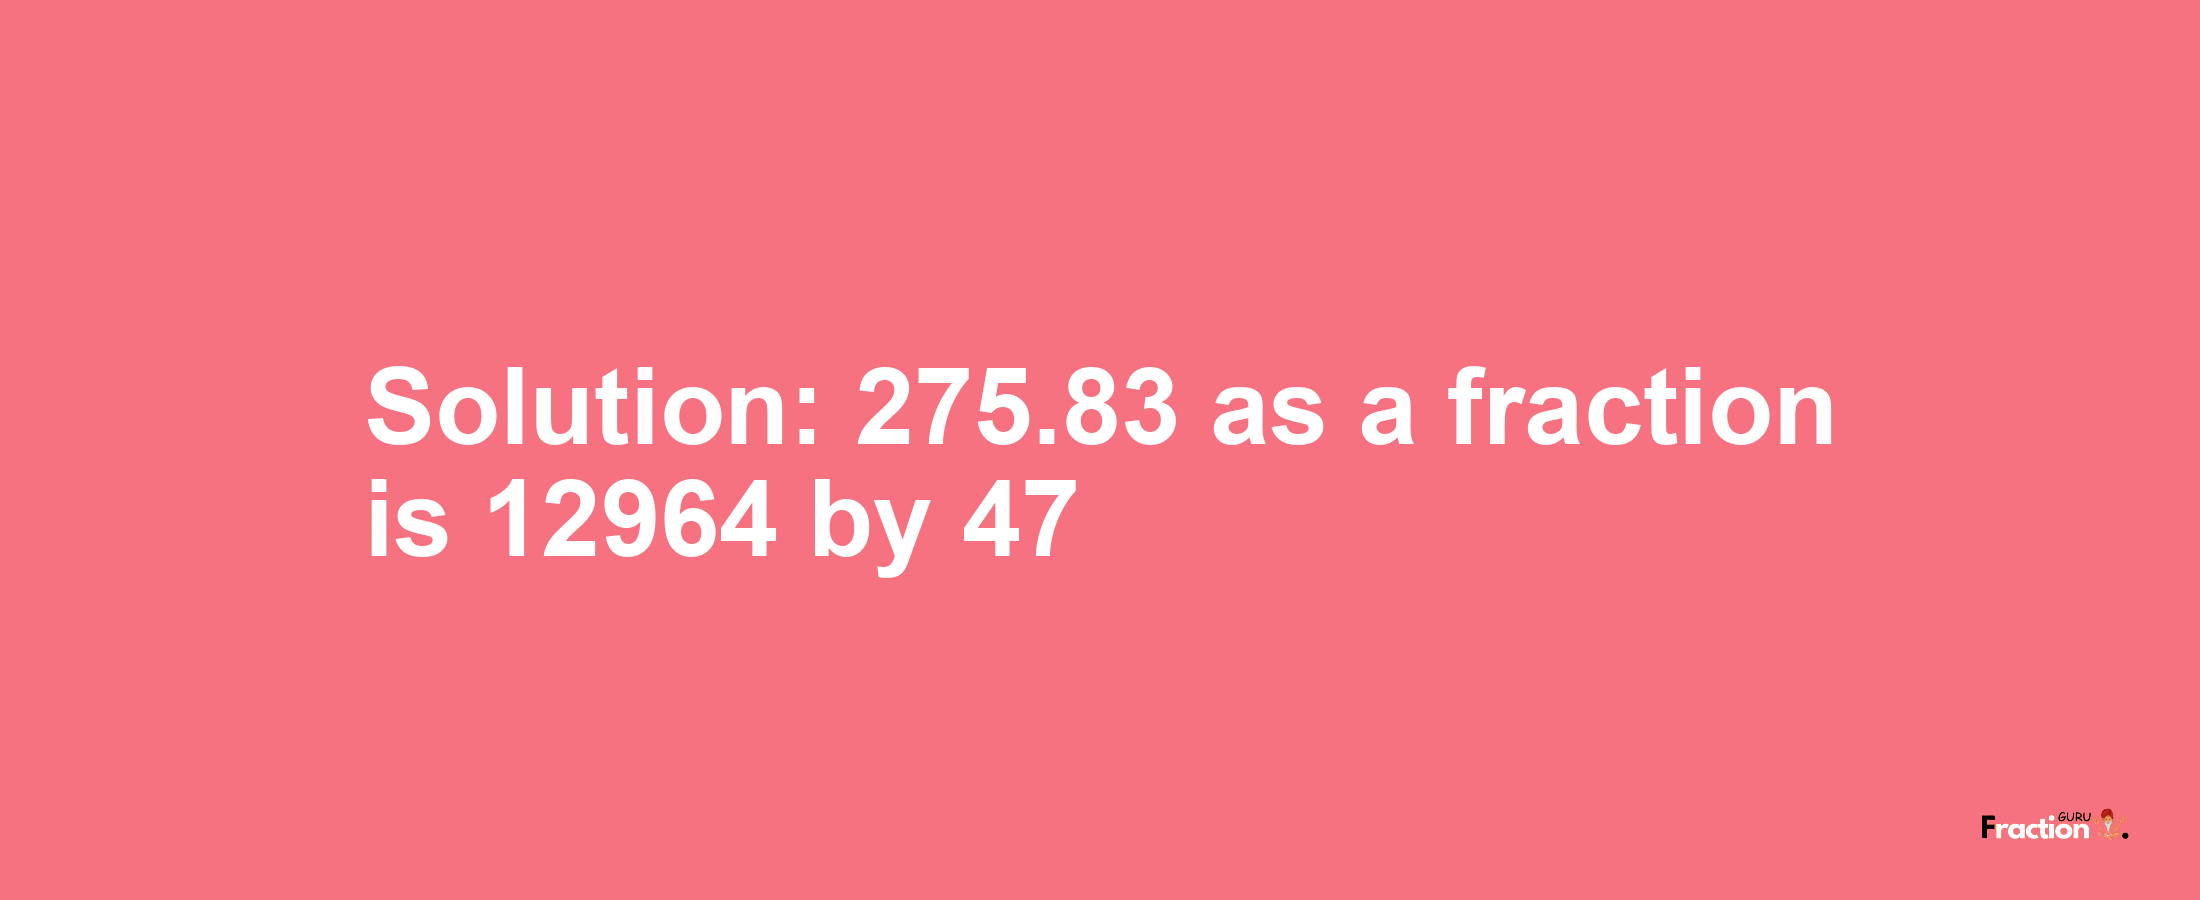 Solution:275.83 as a fraction is 12964/47